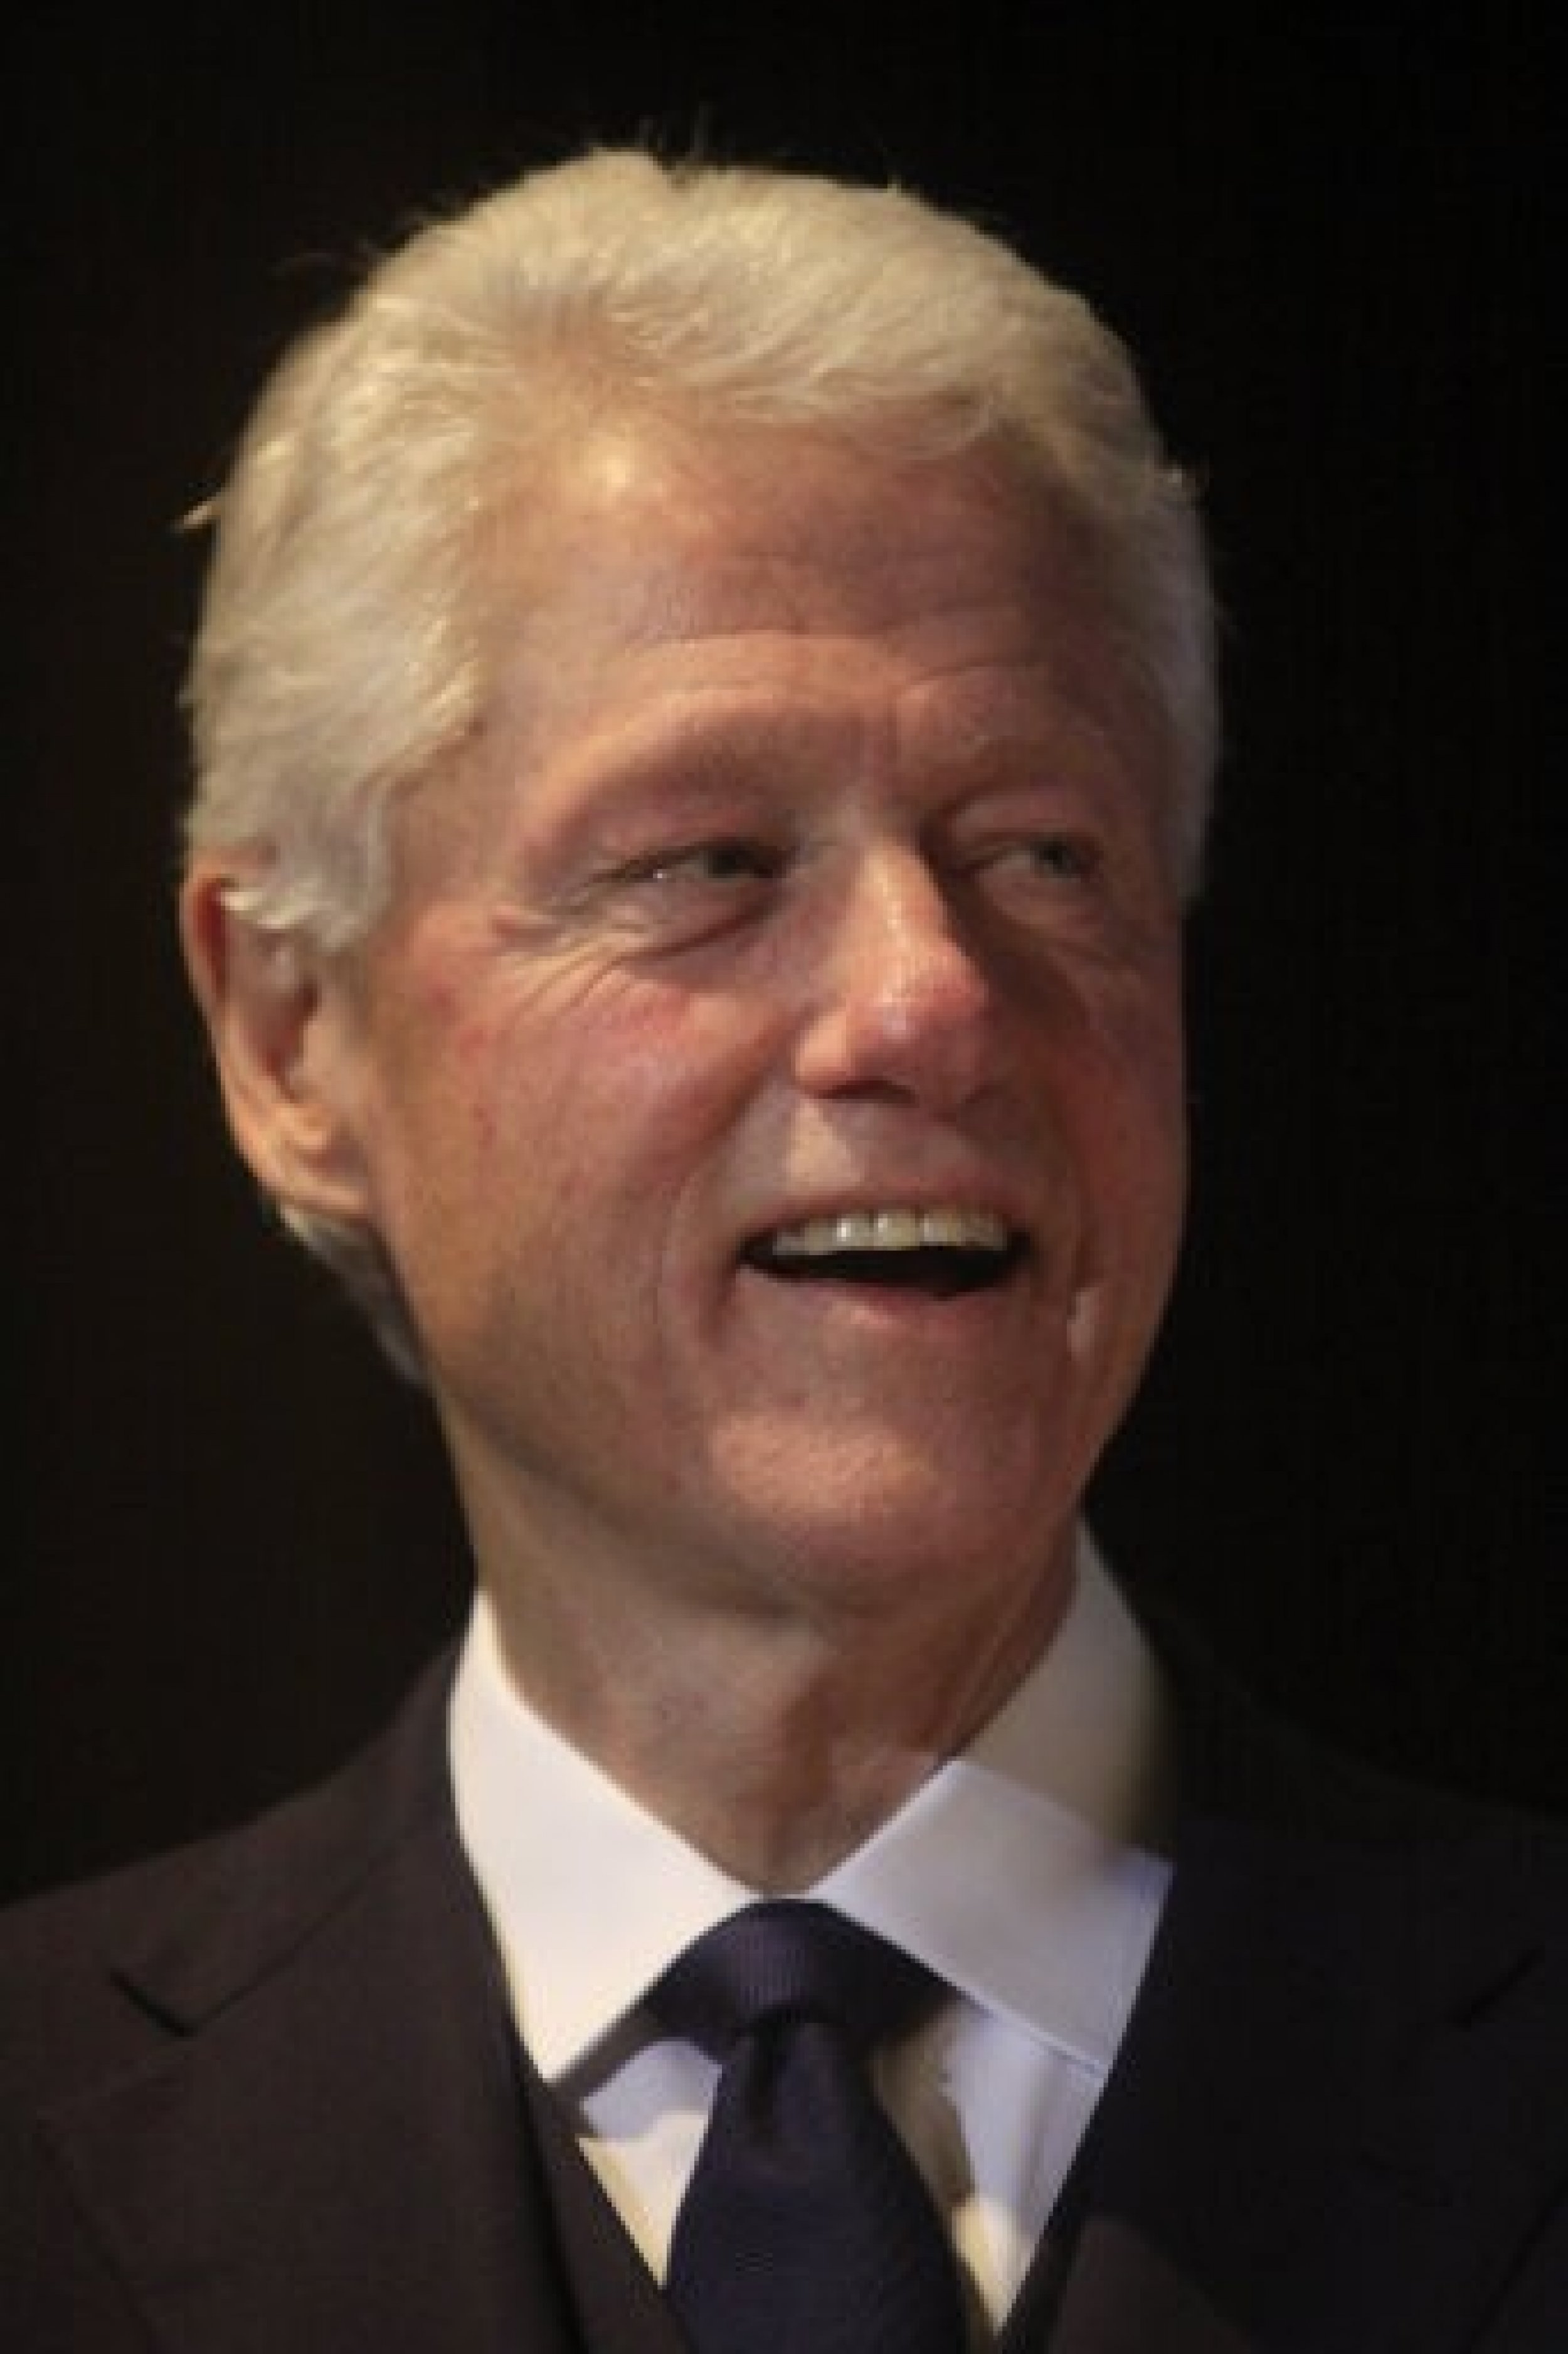 Former U.S. President Bill Clinton attends the annual ThisDay awards ceremony in Lagos, Nigeria, Monday, Feb. 13, 2012.